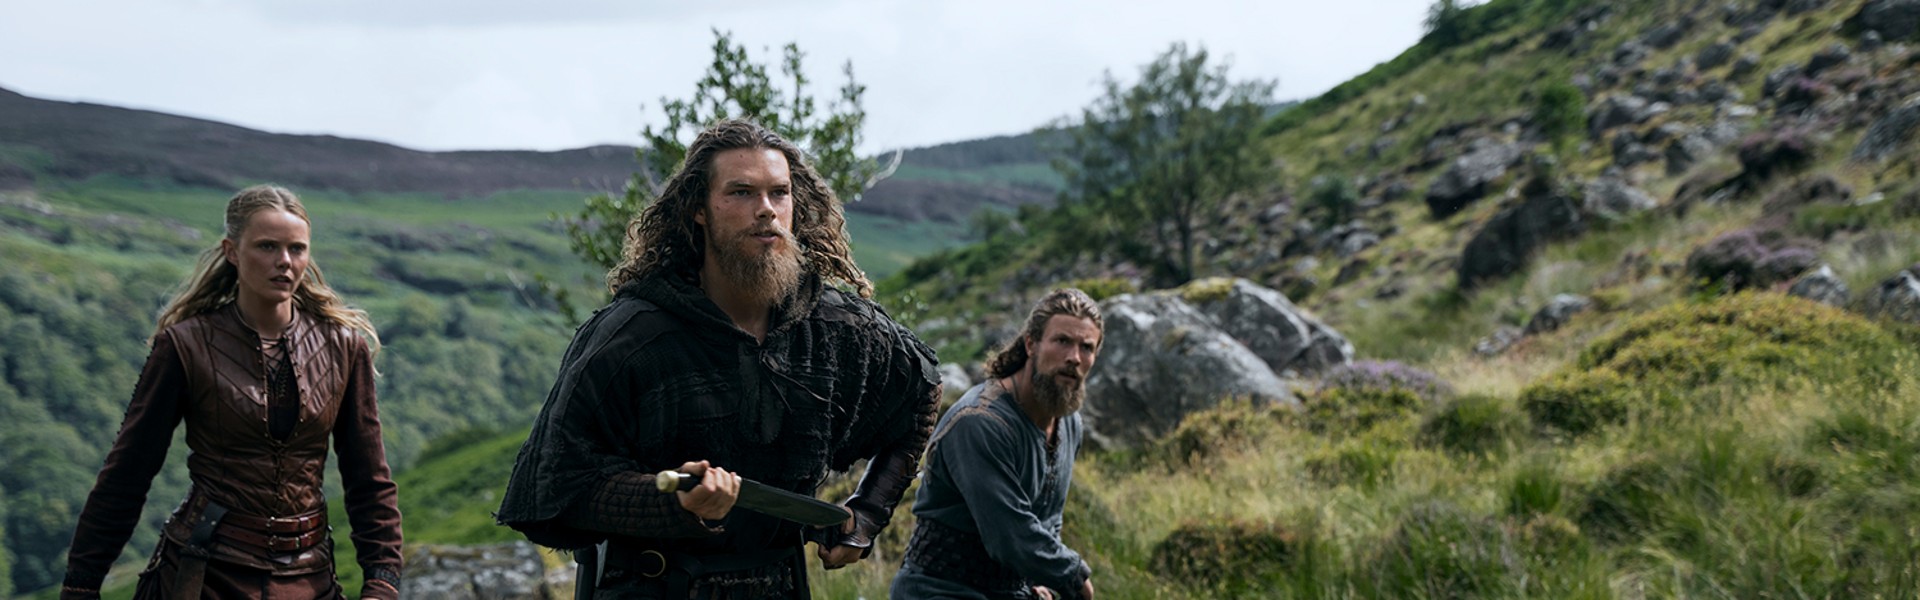 “Vikings: Valhalla”: Will There Be a Season 4? Netflix Has Made a Decision